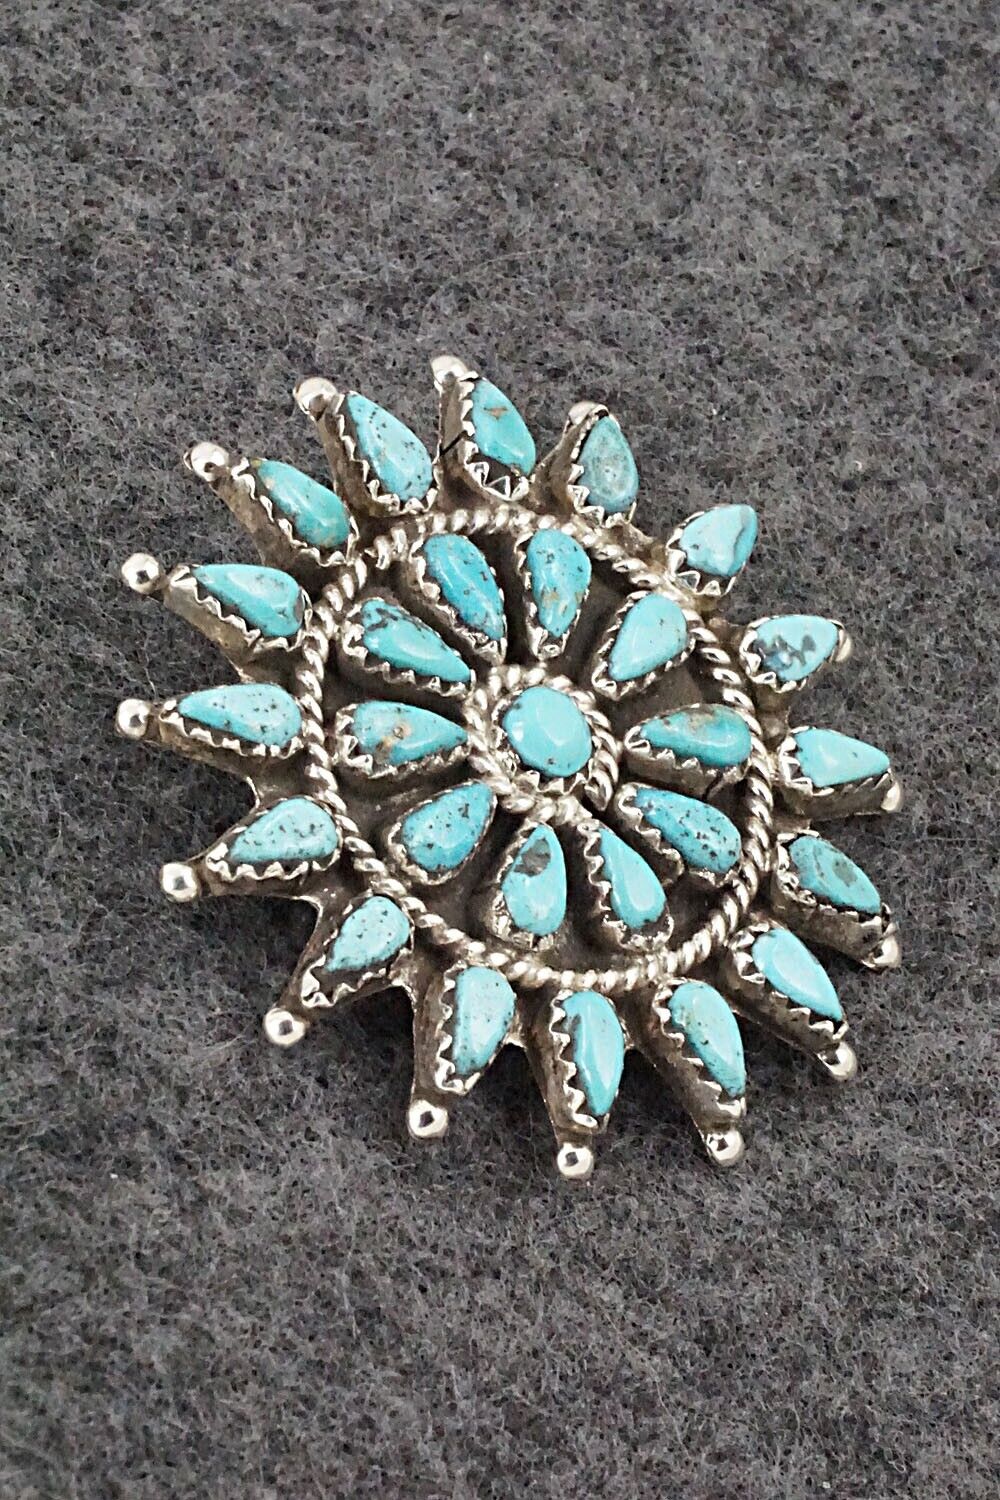 Turquoise & Sterling Silver Pendant/Pin - George Gasper